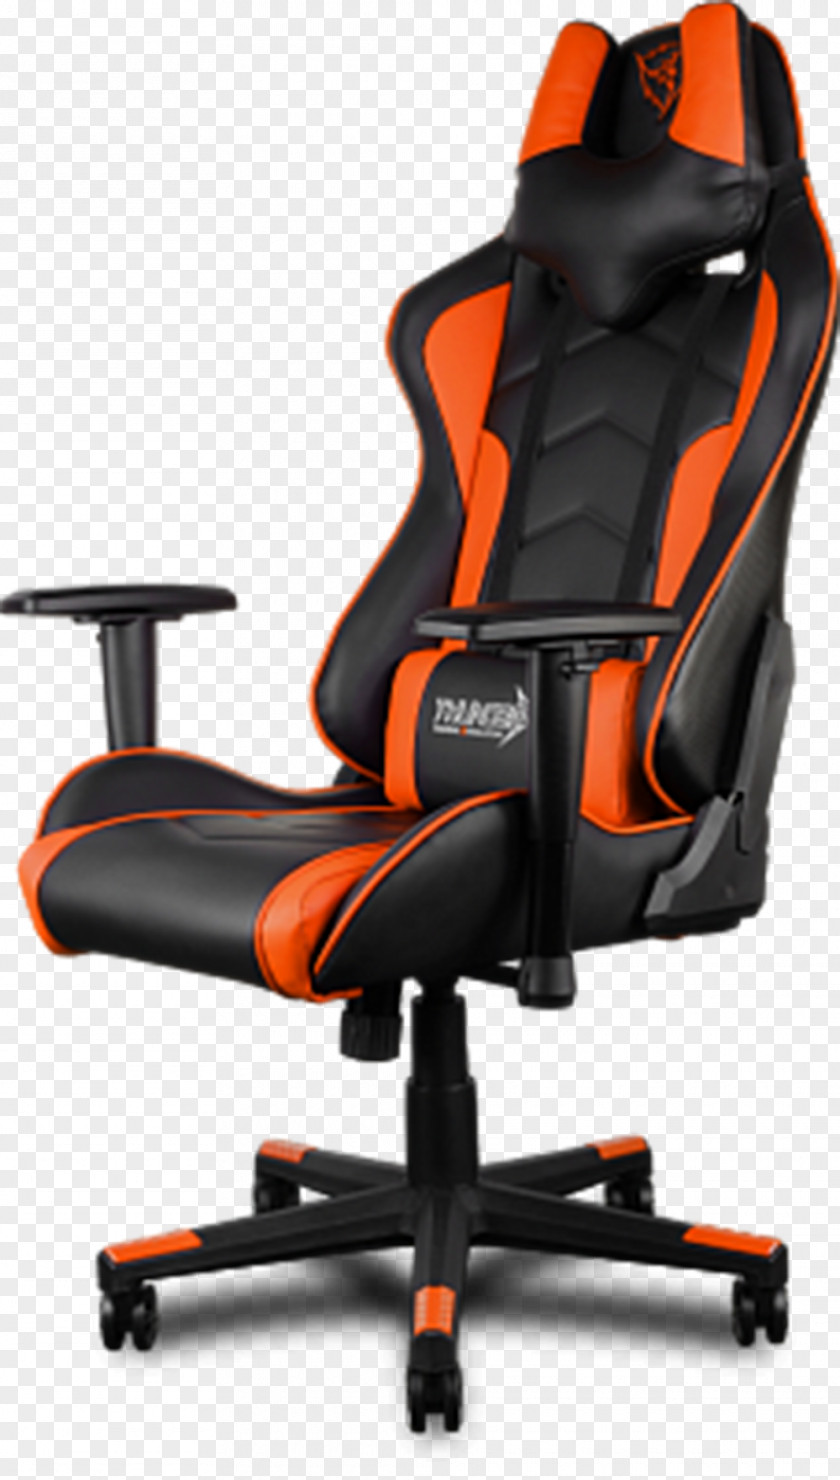 Chair Gaming Video Game Furniture Office & Desk Chairs PNG